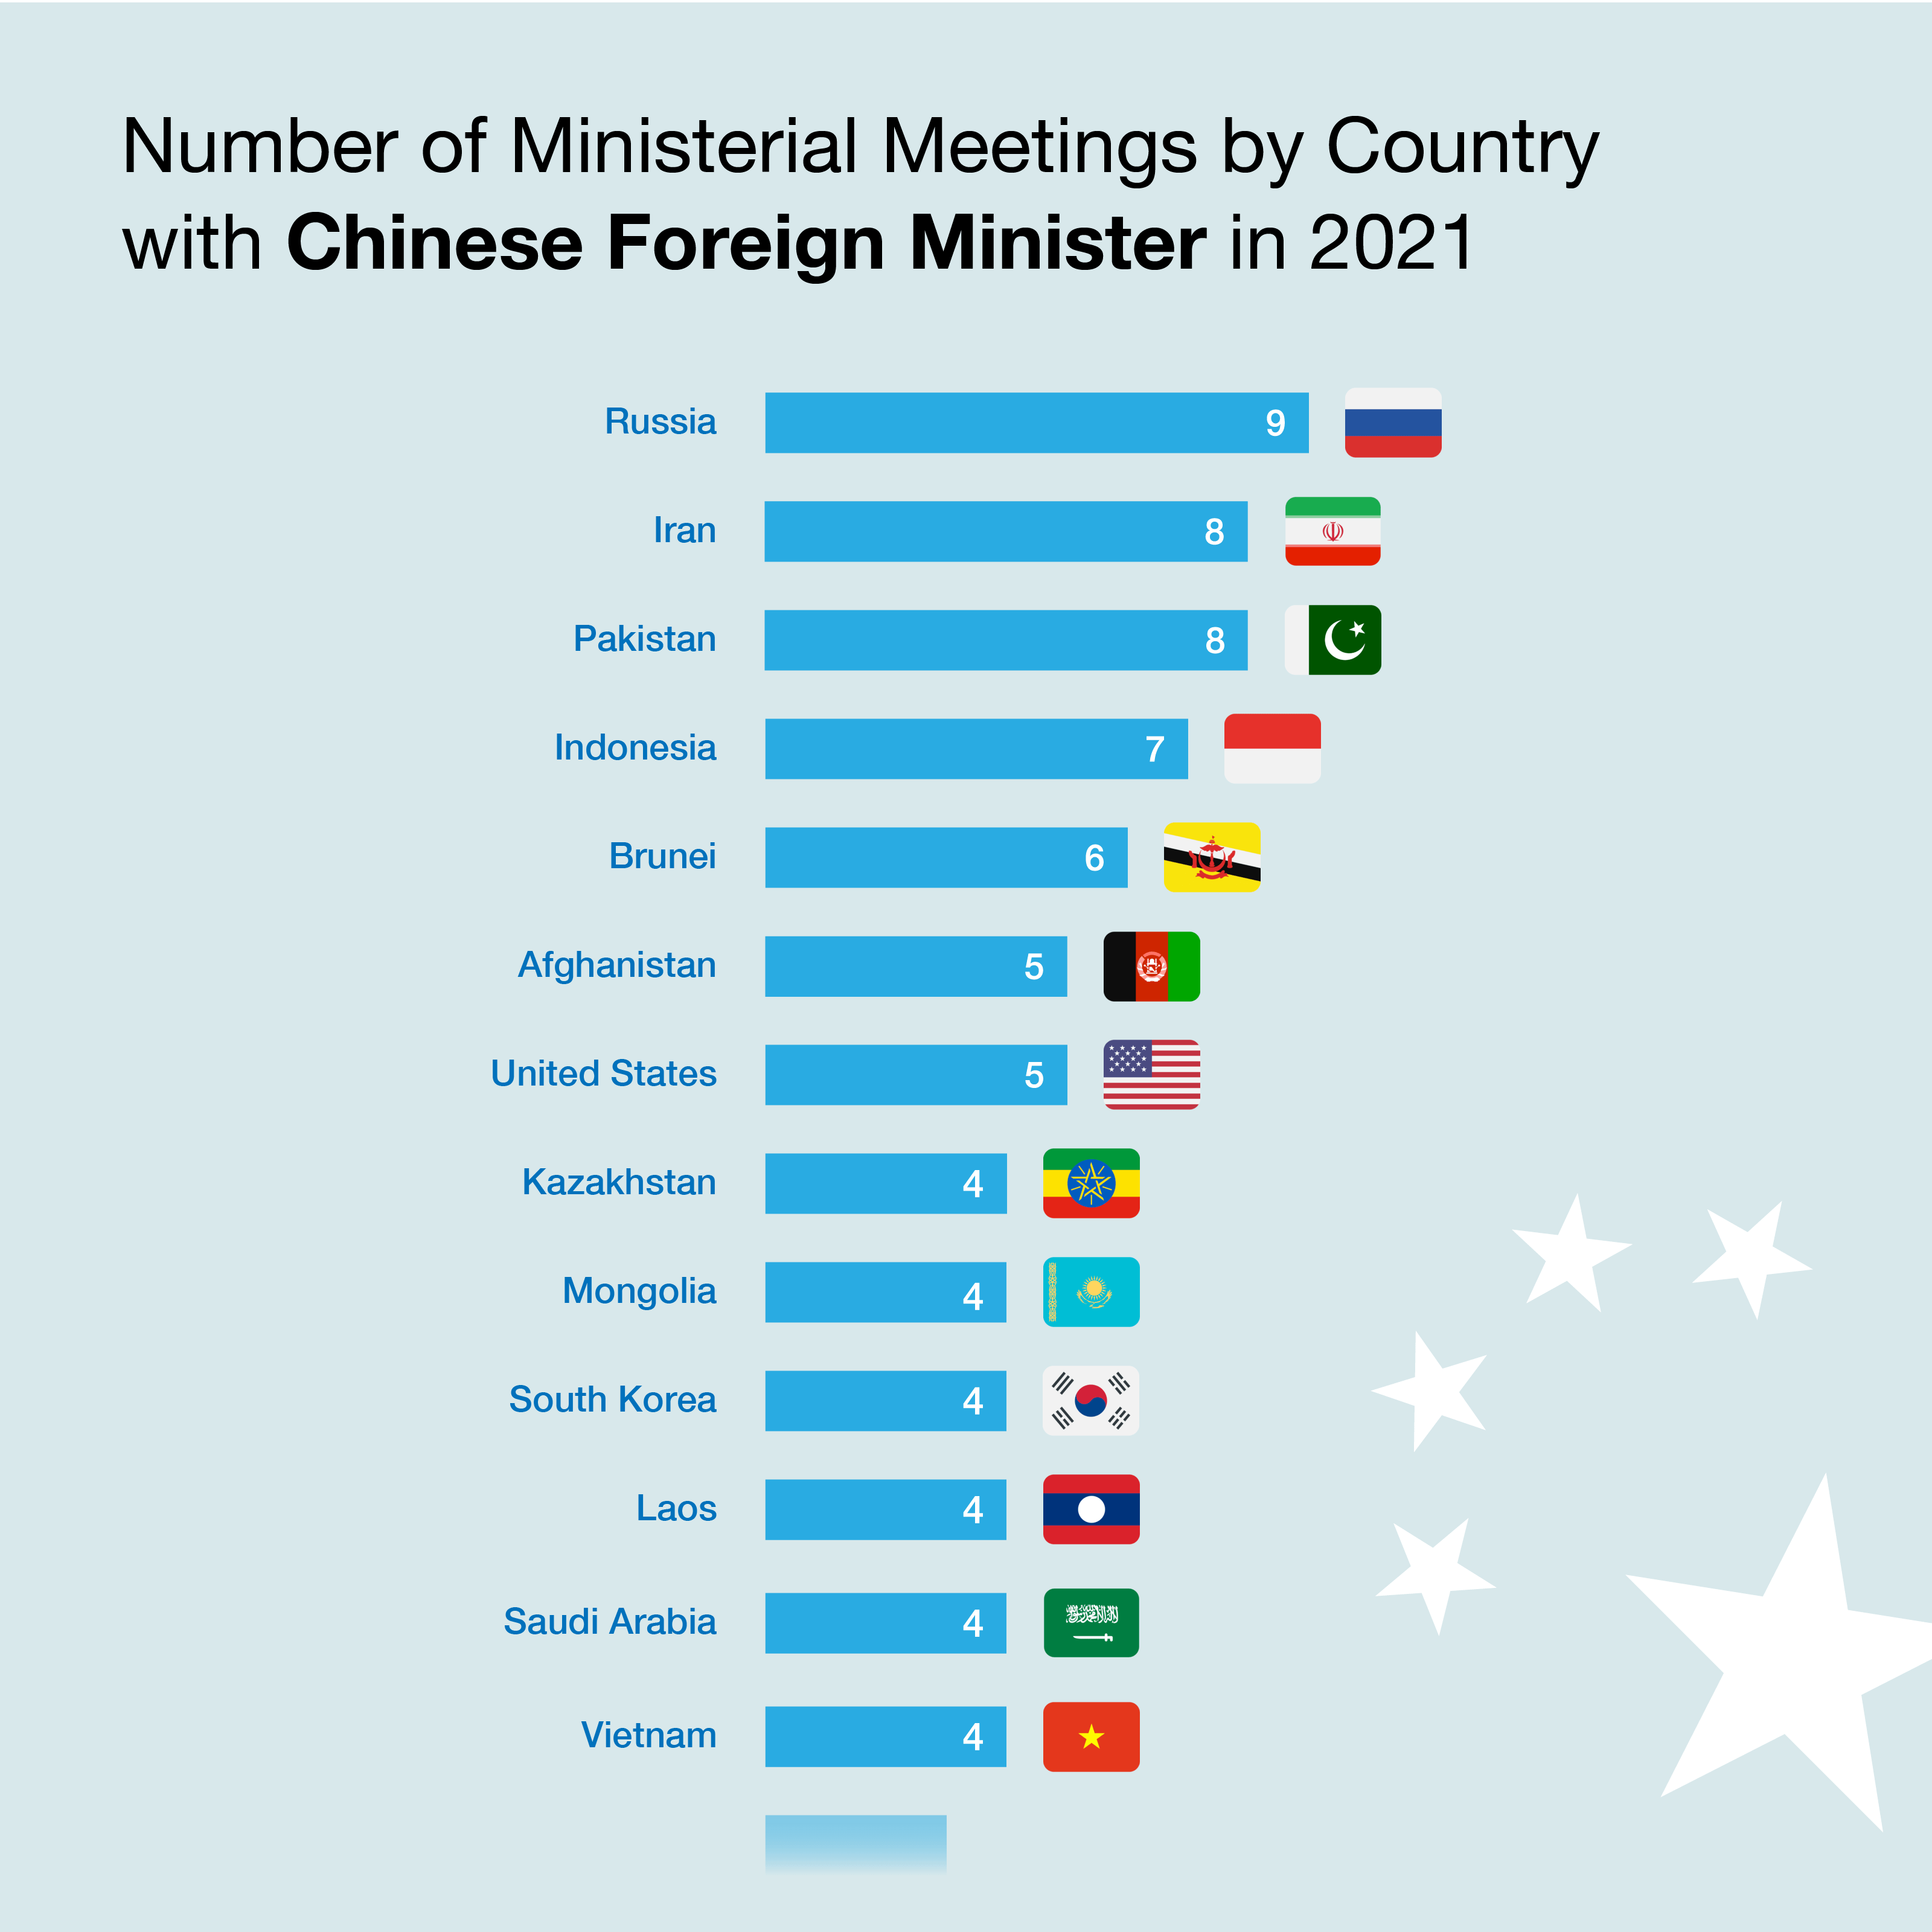 Number of Ministerial Meetings by Country with Chinese Foreign Minister in 2021